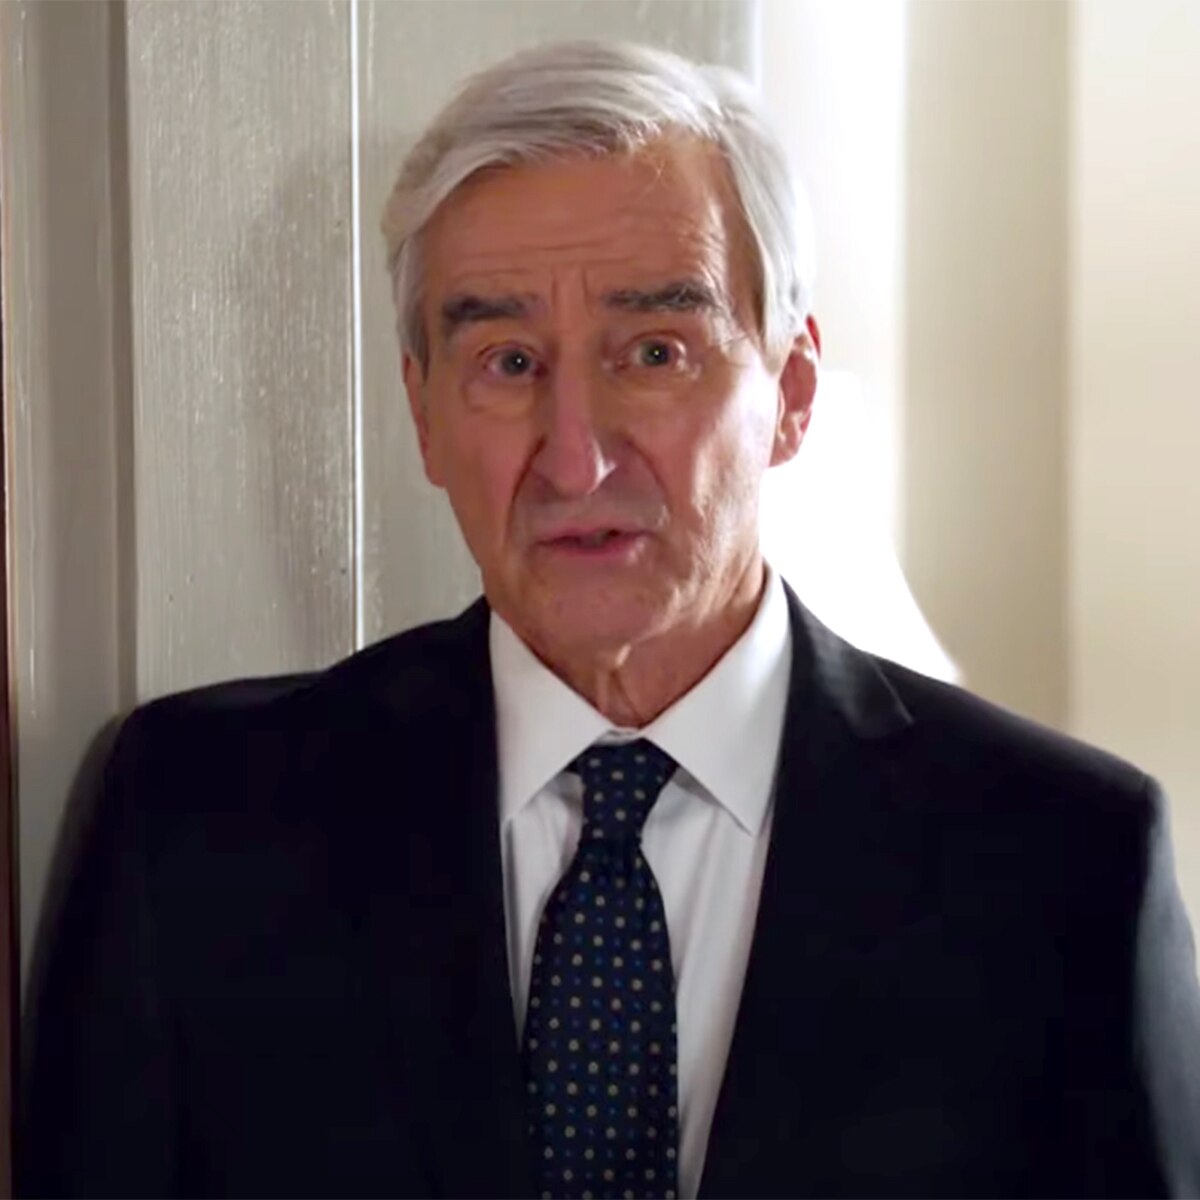 Sam Waterston, Law and Order Revival 